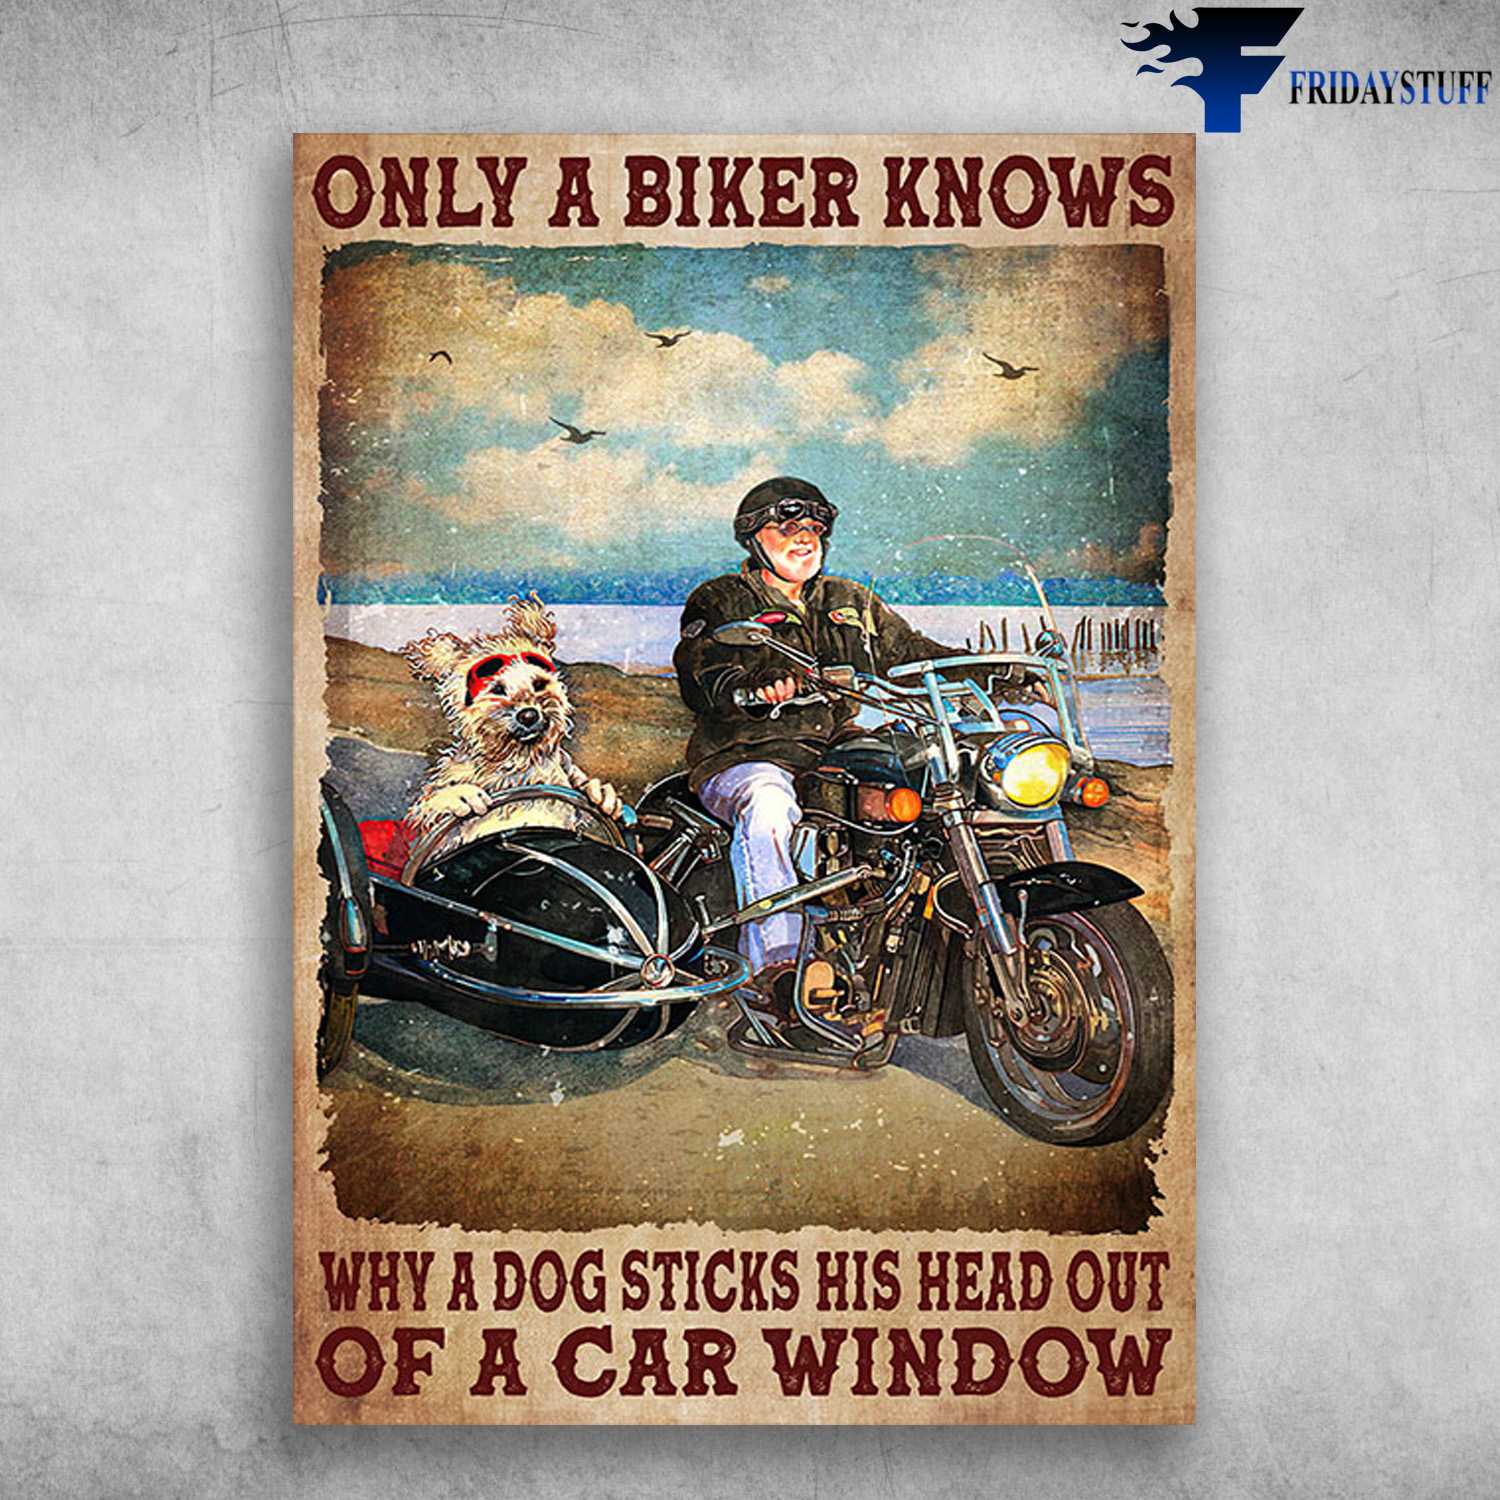 Sidecar Dog - Only A Biker Knows, Why A Dog Sticks His Head, Out Of A Car Window